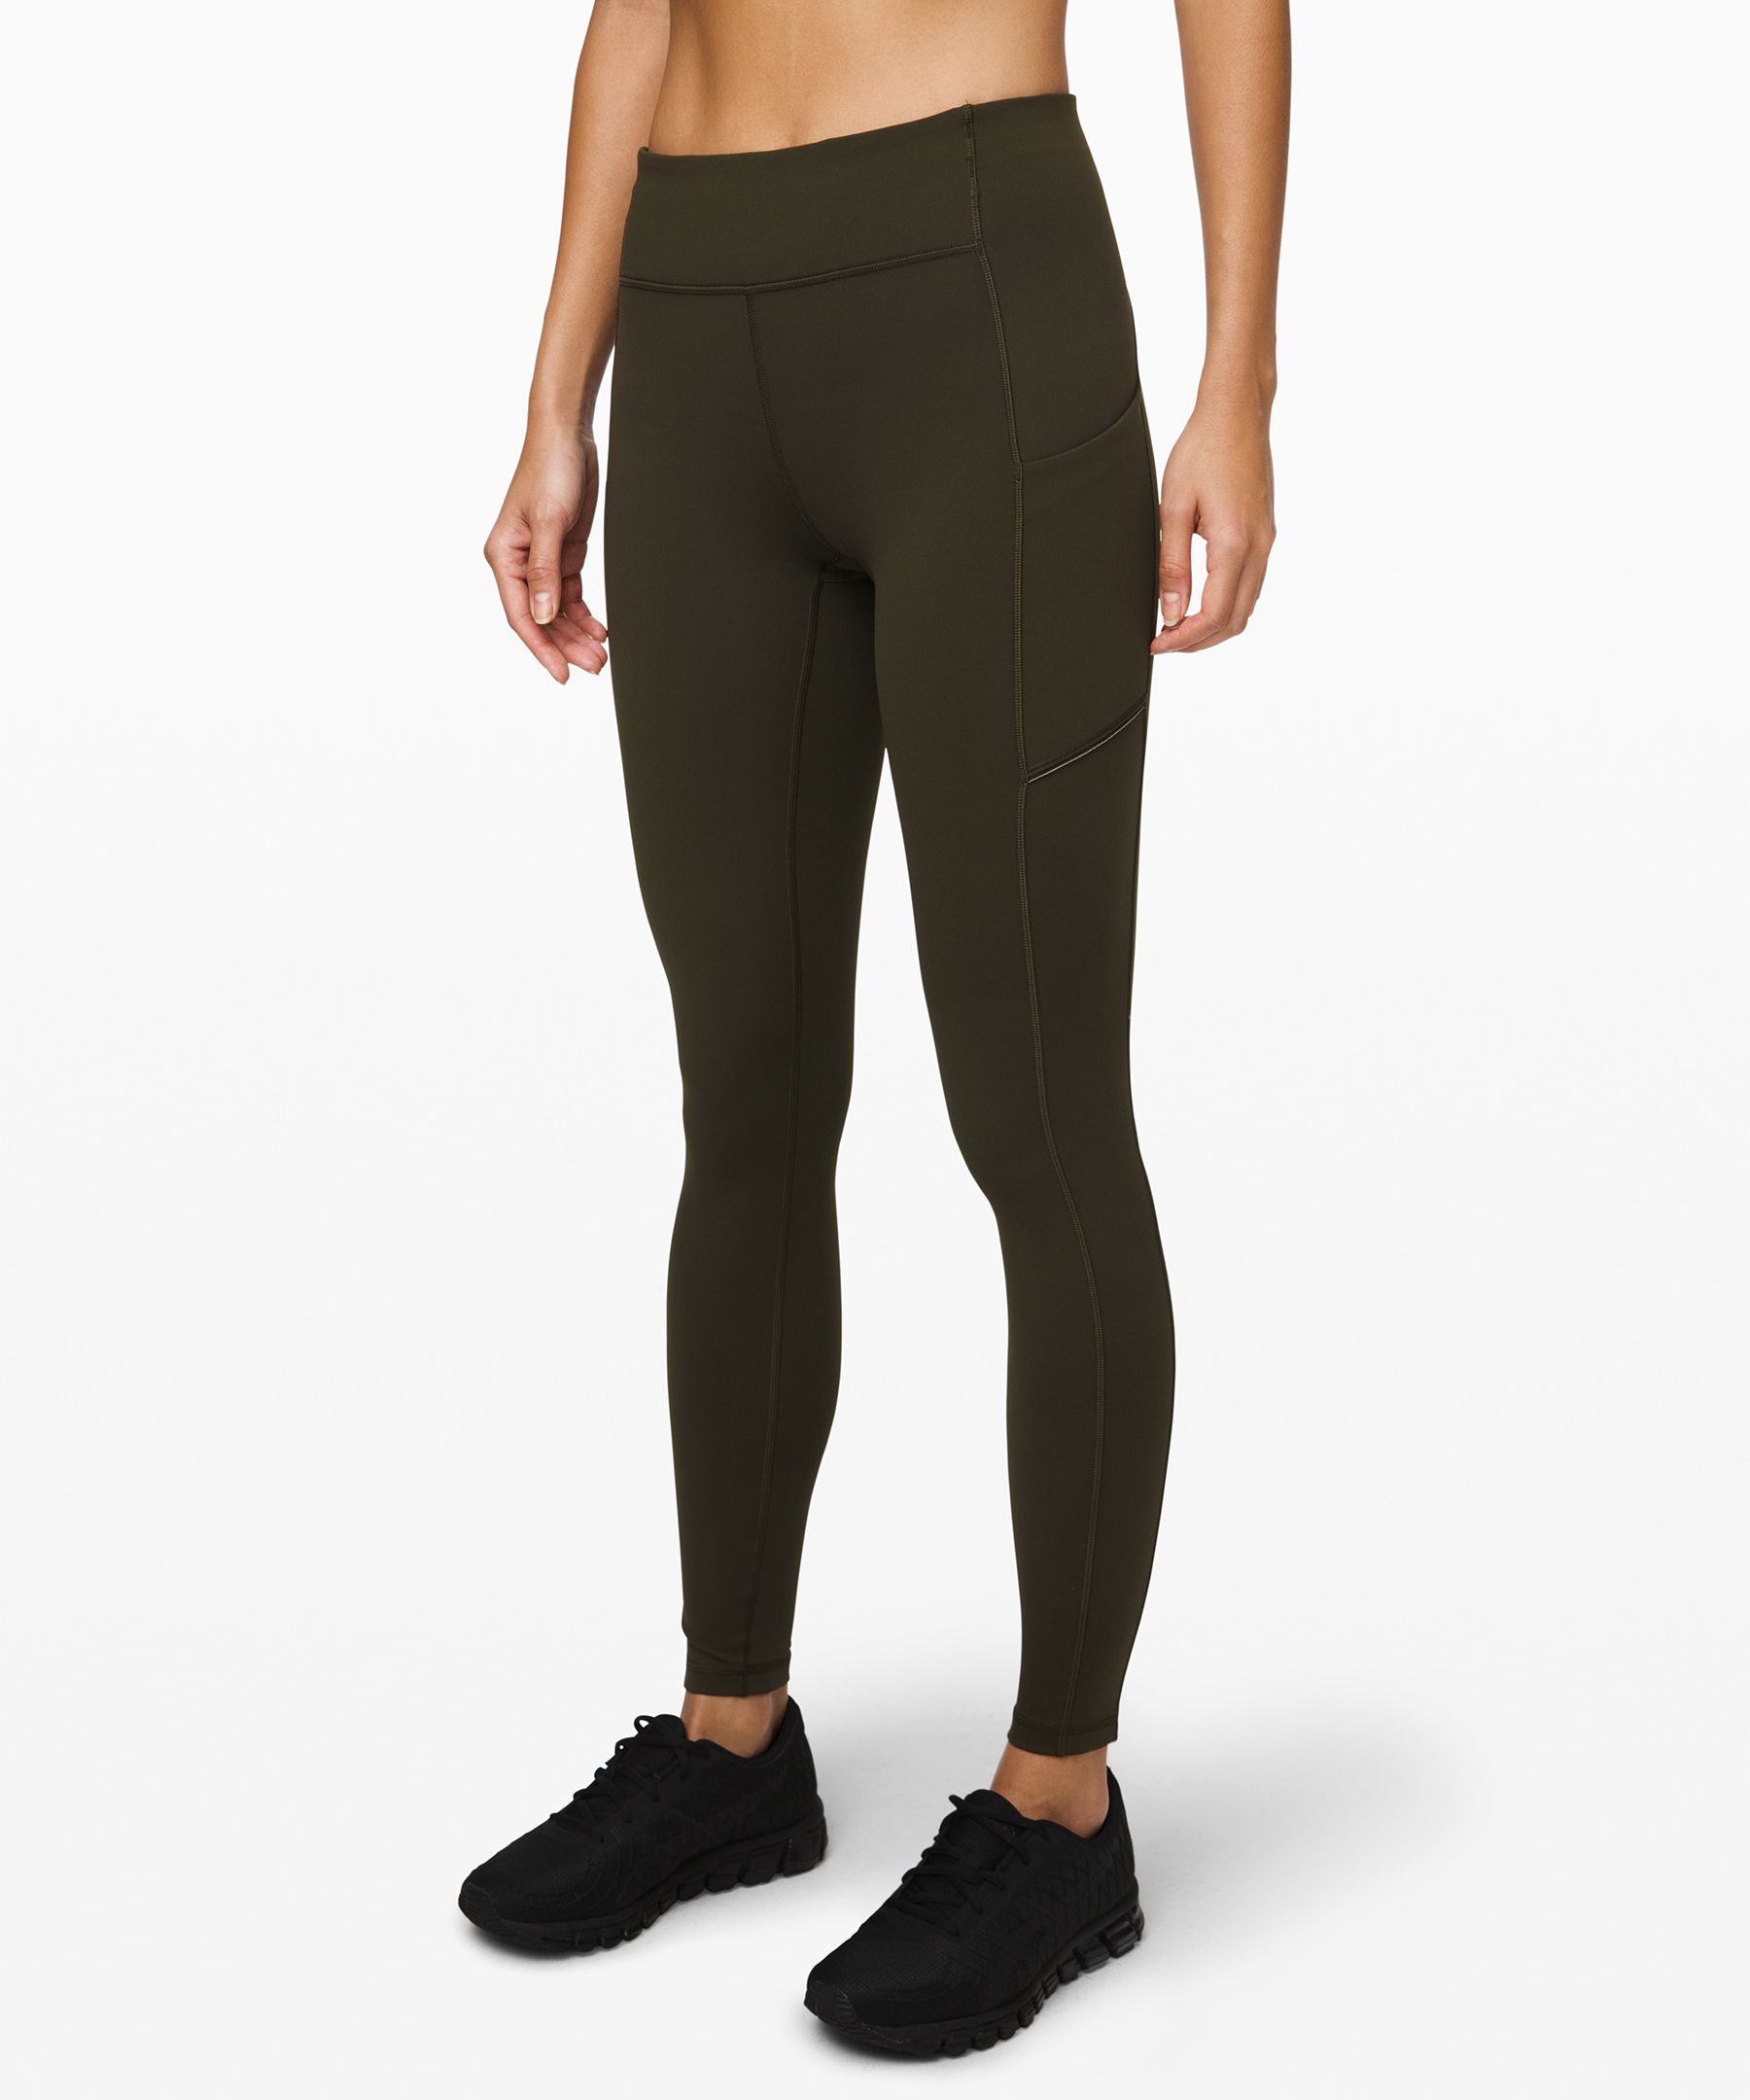 Speed Up Mid-Rise Tight 28, Women's Leggings/Tights